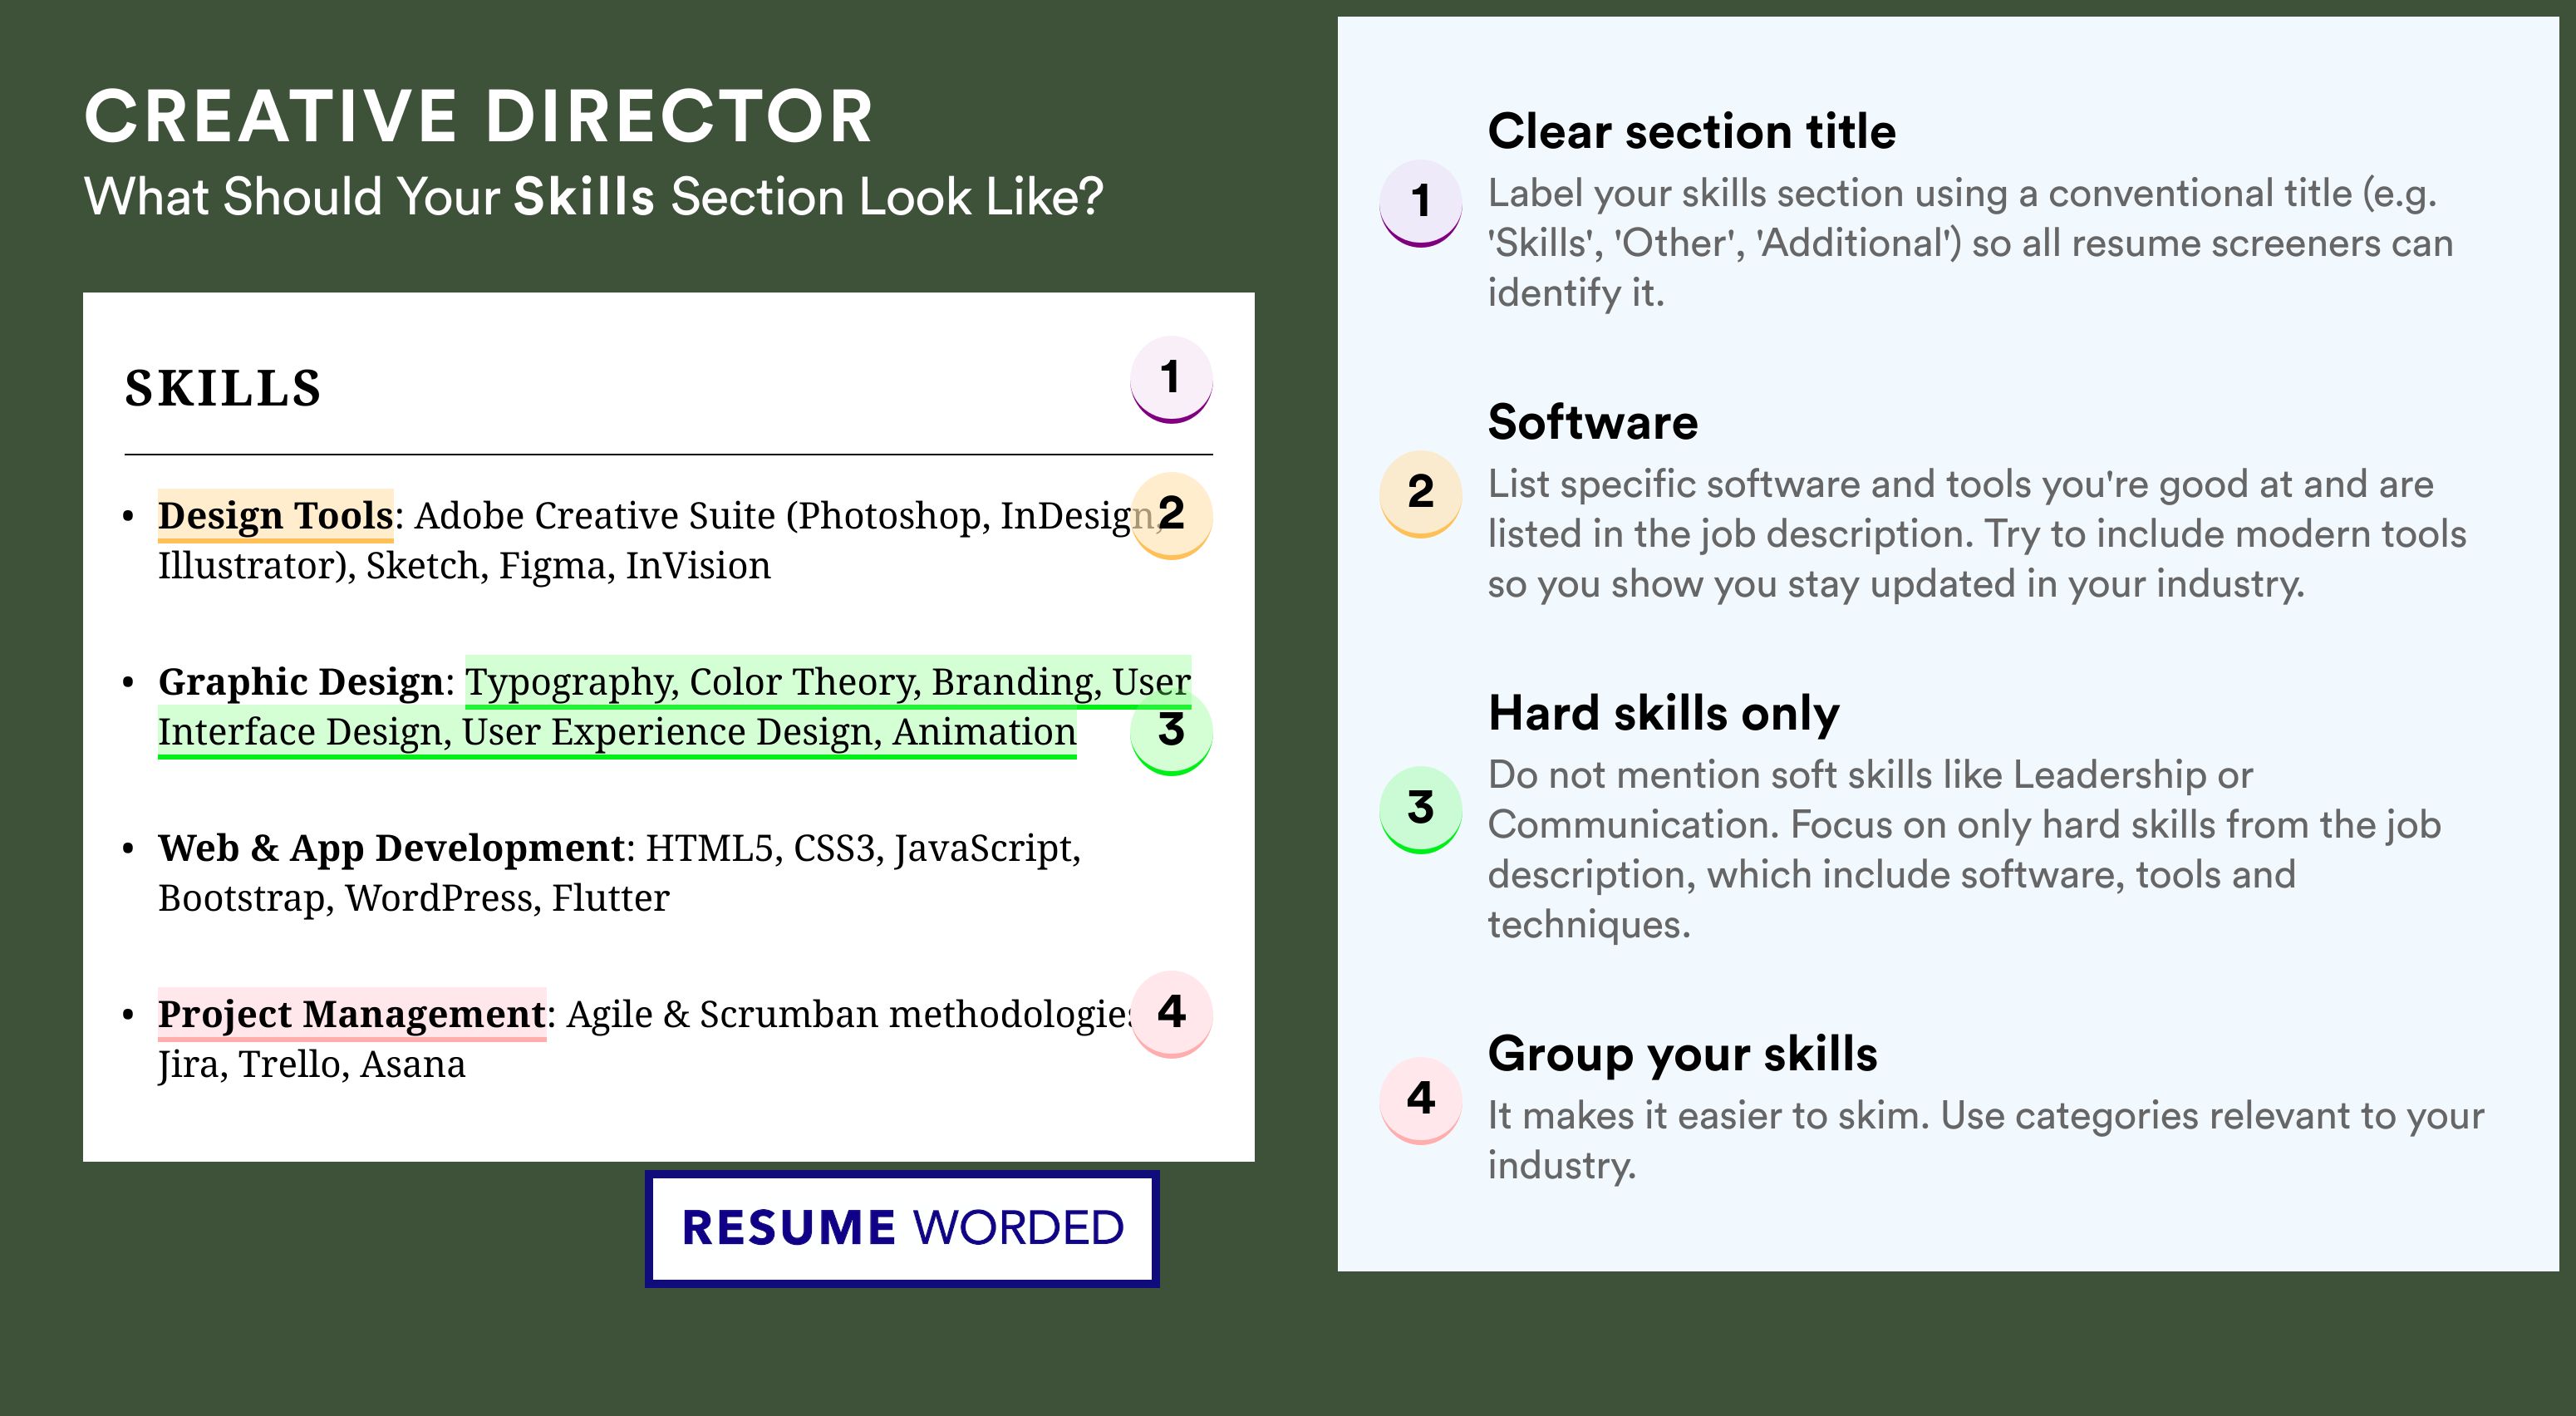 How To Write Your Skills Section - Creative Director Roles